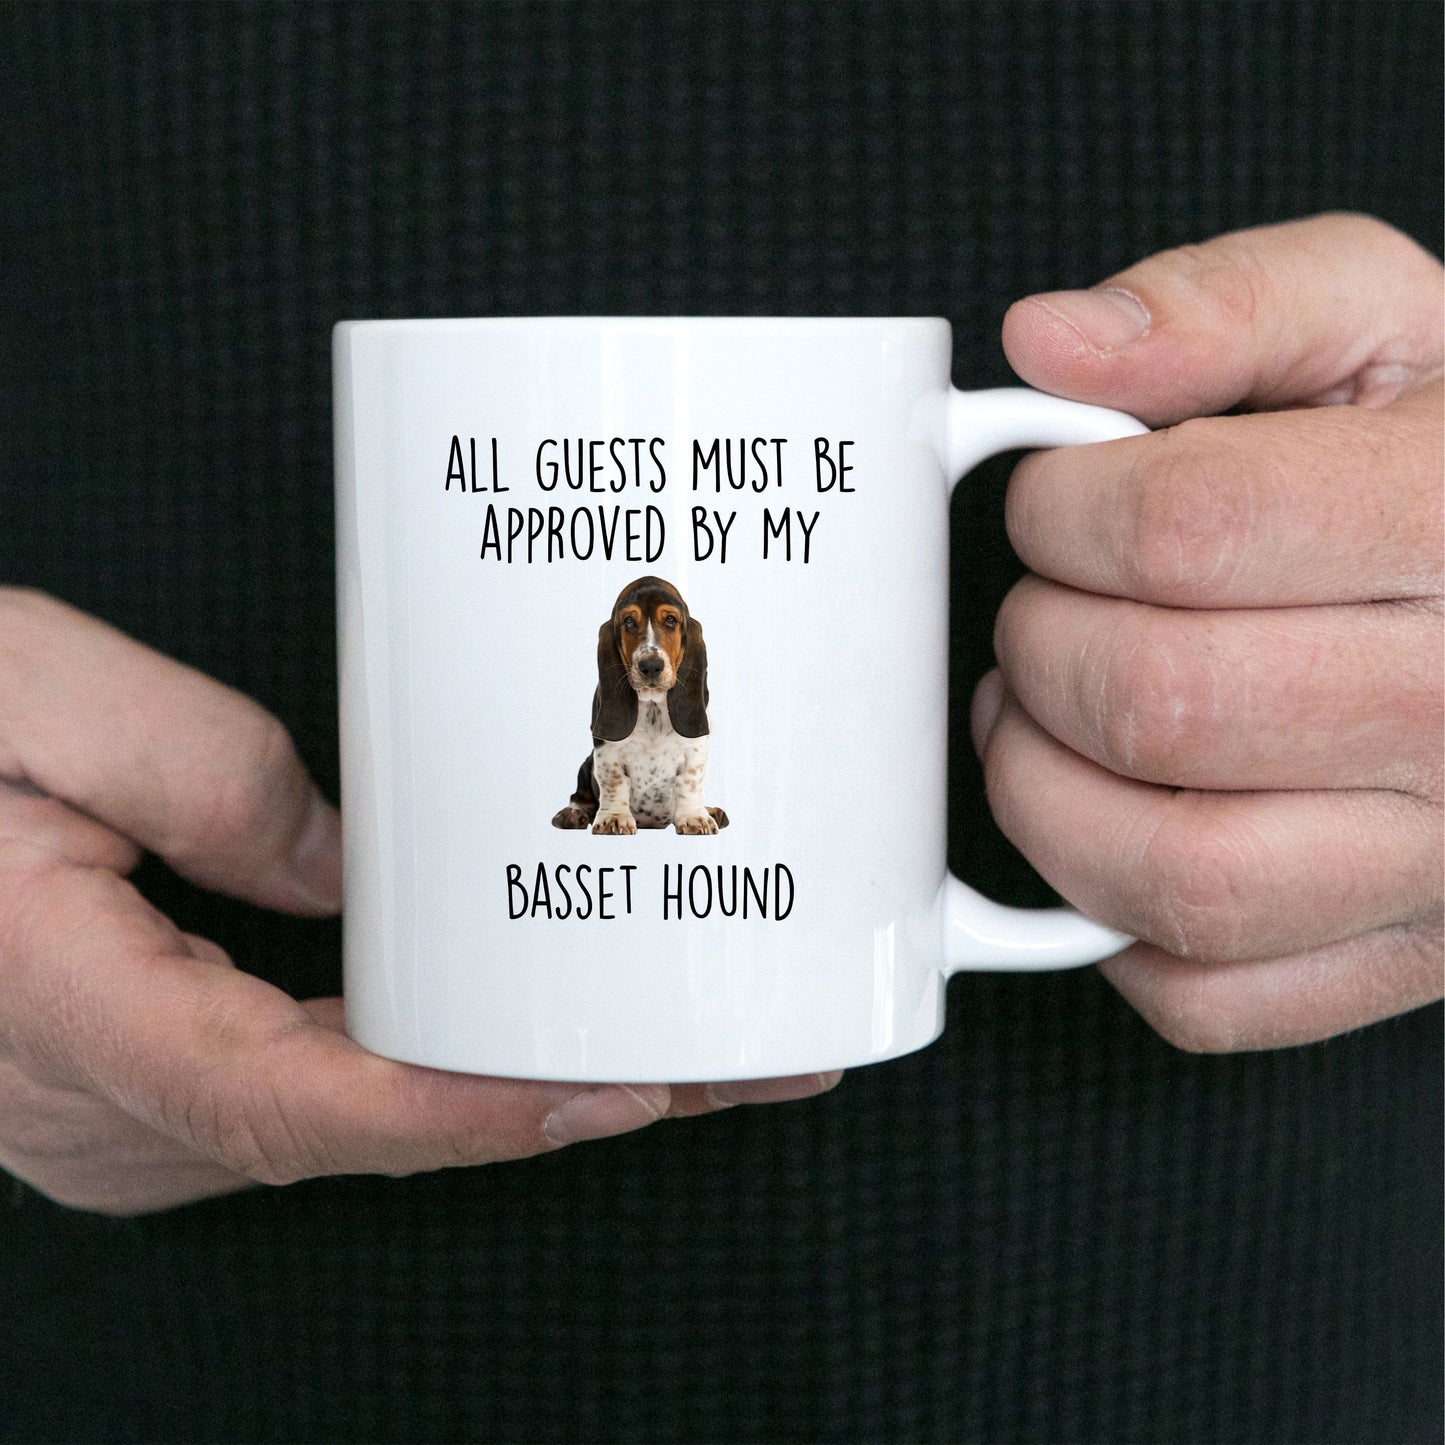 Funny Basset Hound Dog Custom Ceramic Coffee Mug - Guests Must be Approved